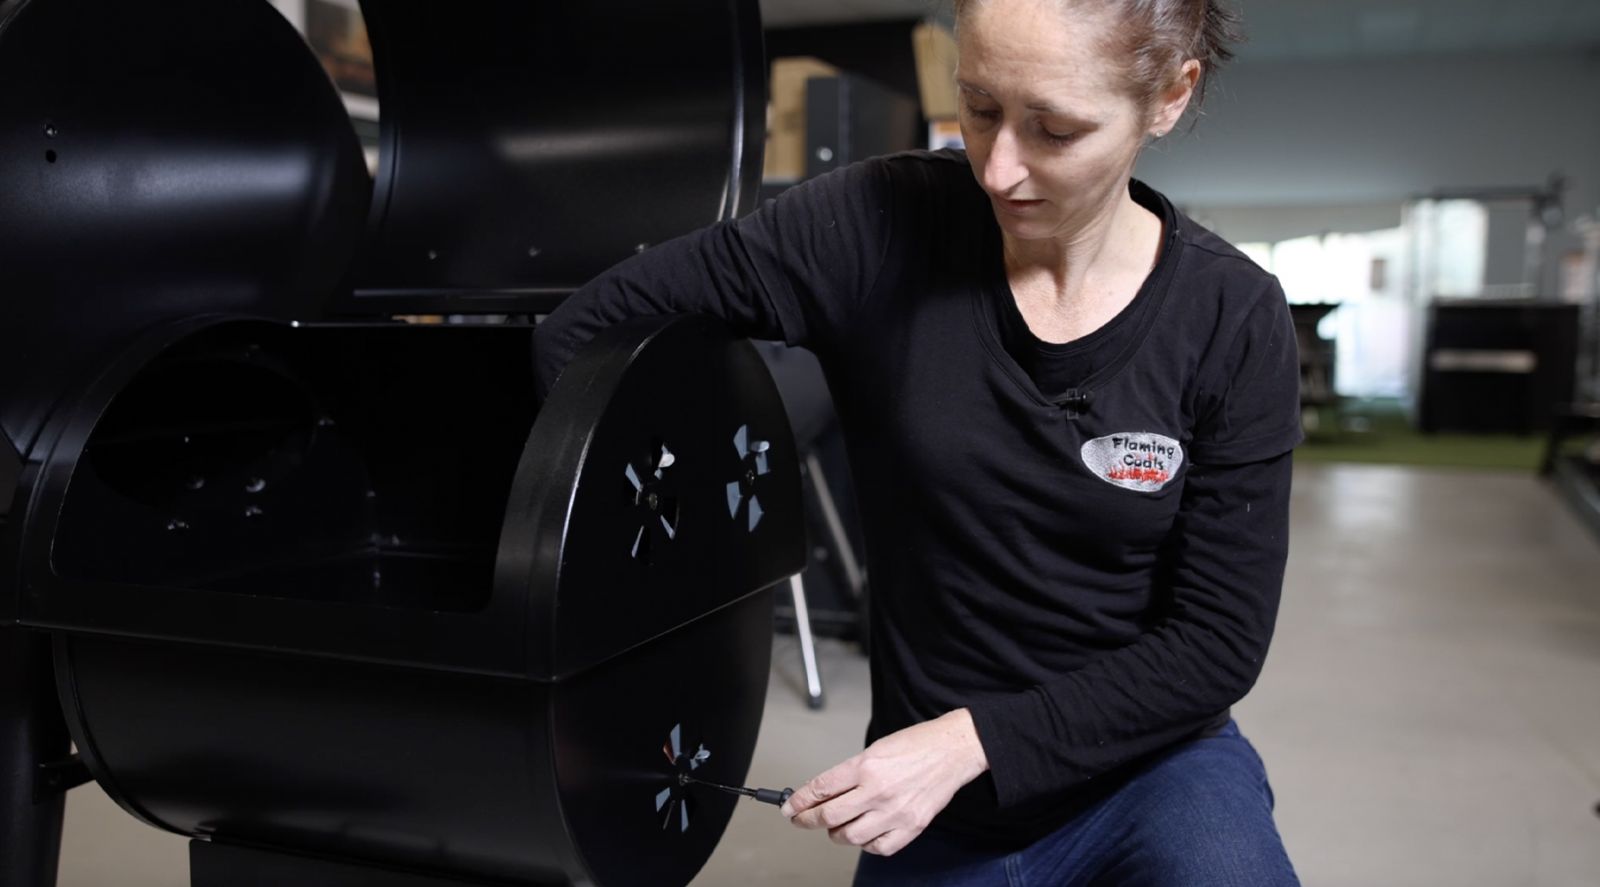 This image shows a woman removing the air vent of the offset smoker